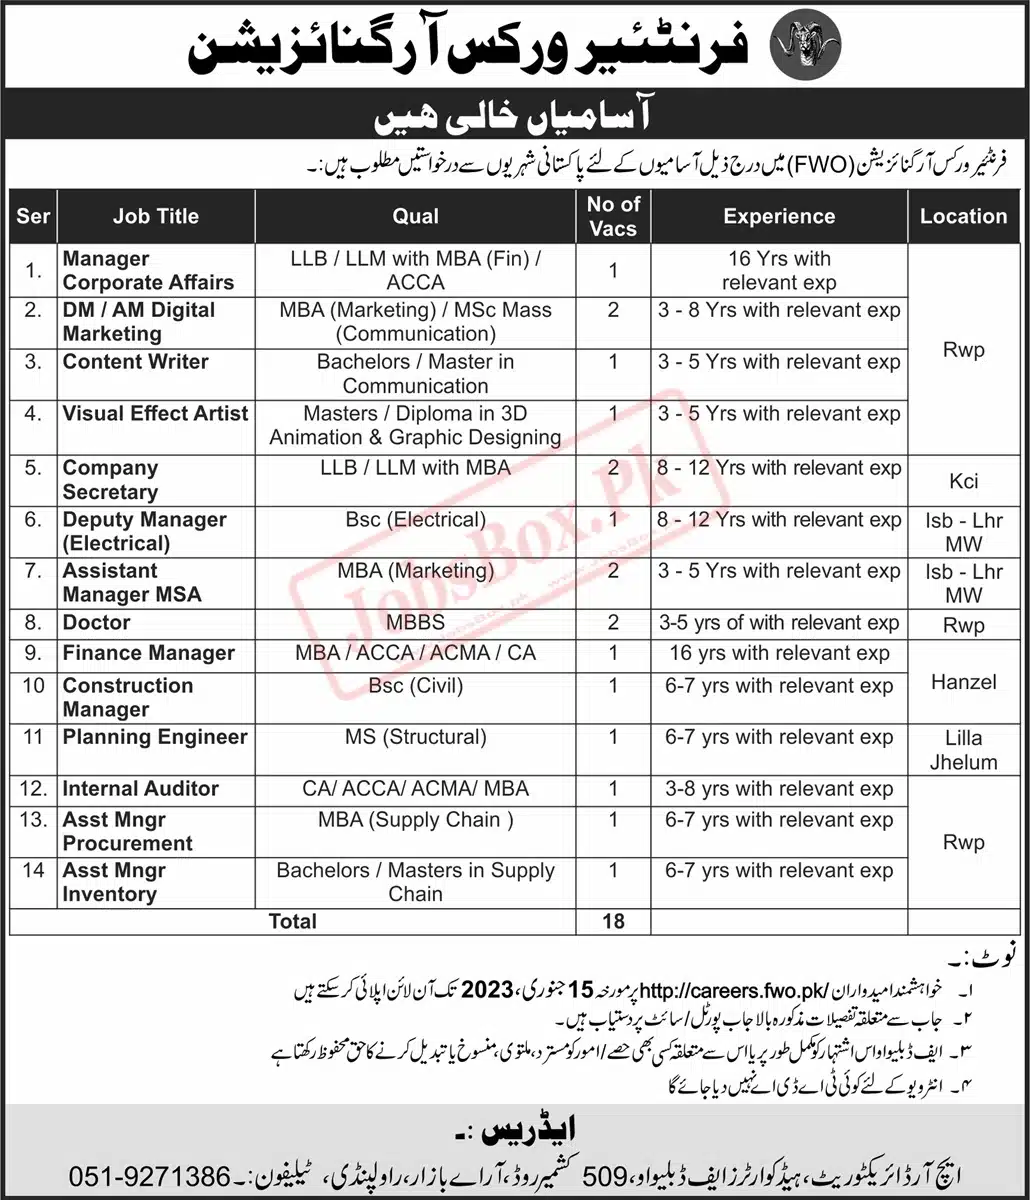 Frontier Works Organization FWO Jobs 2023 - Details available at career.fwo.com.pk